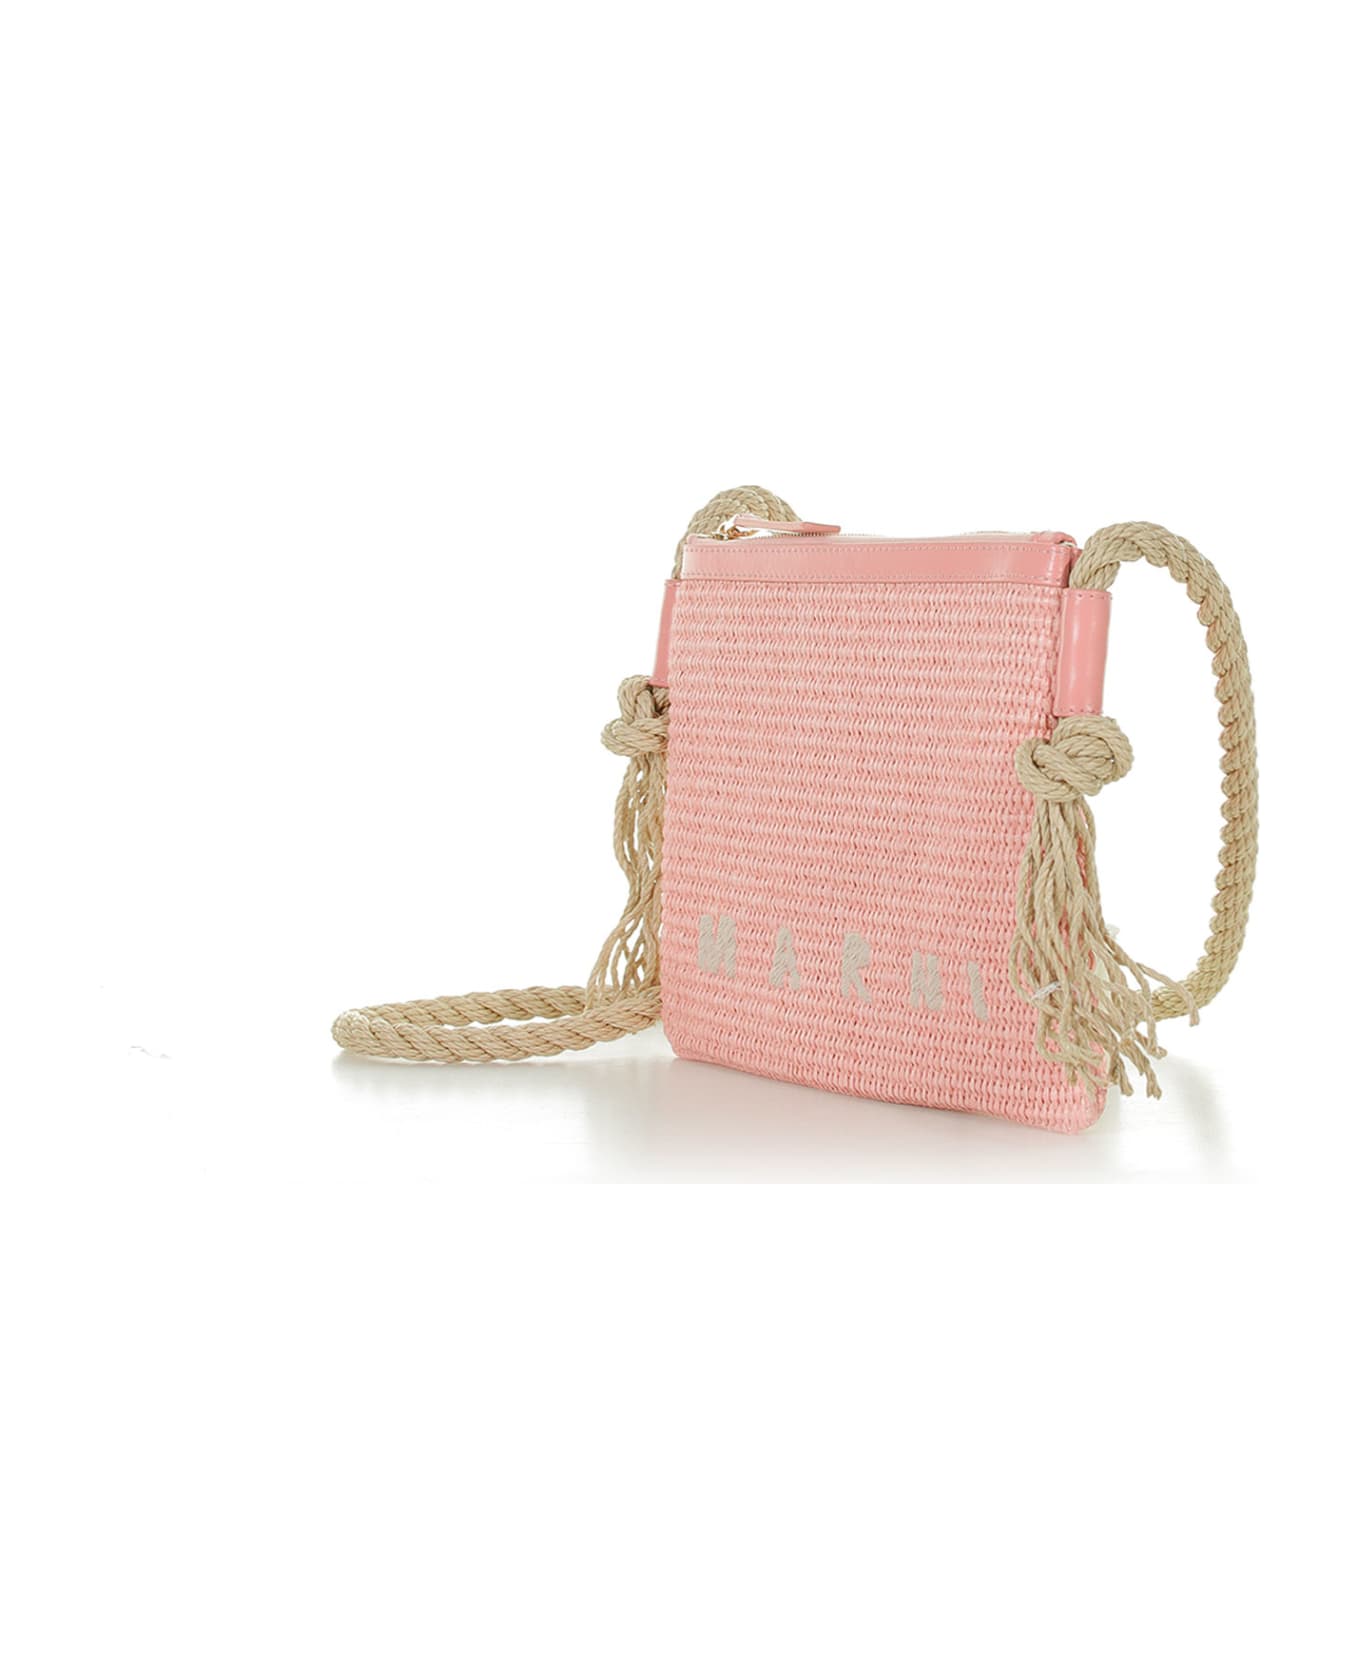 Marni Shoulder Bag In Raffia Fabric With Leather Profiles - LIGHT PINK/LIGHT PINK